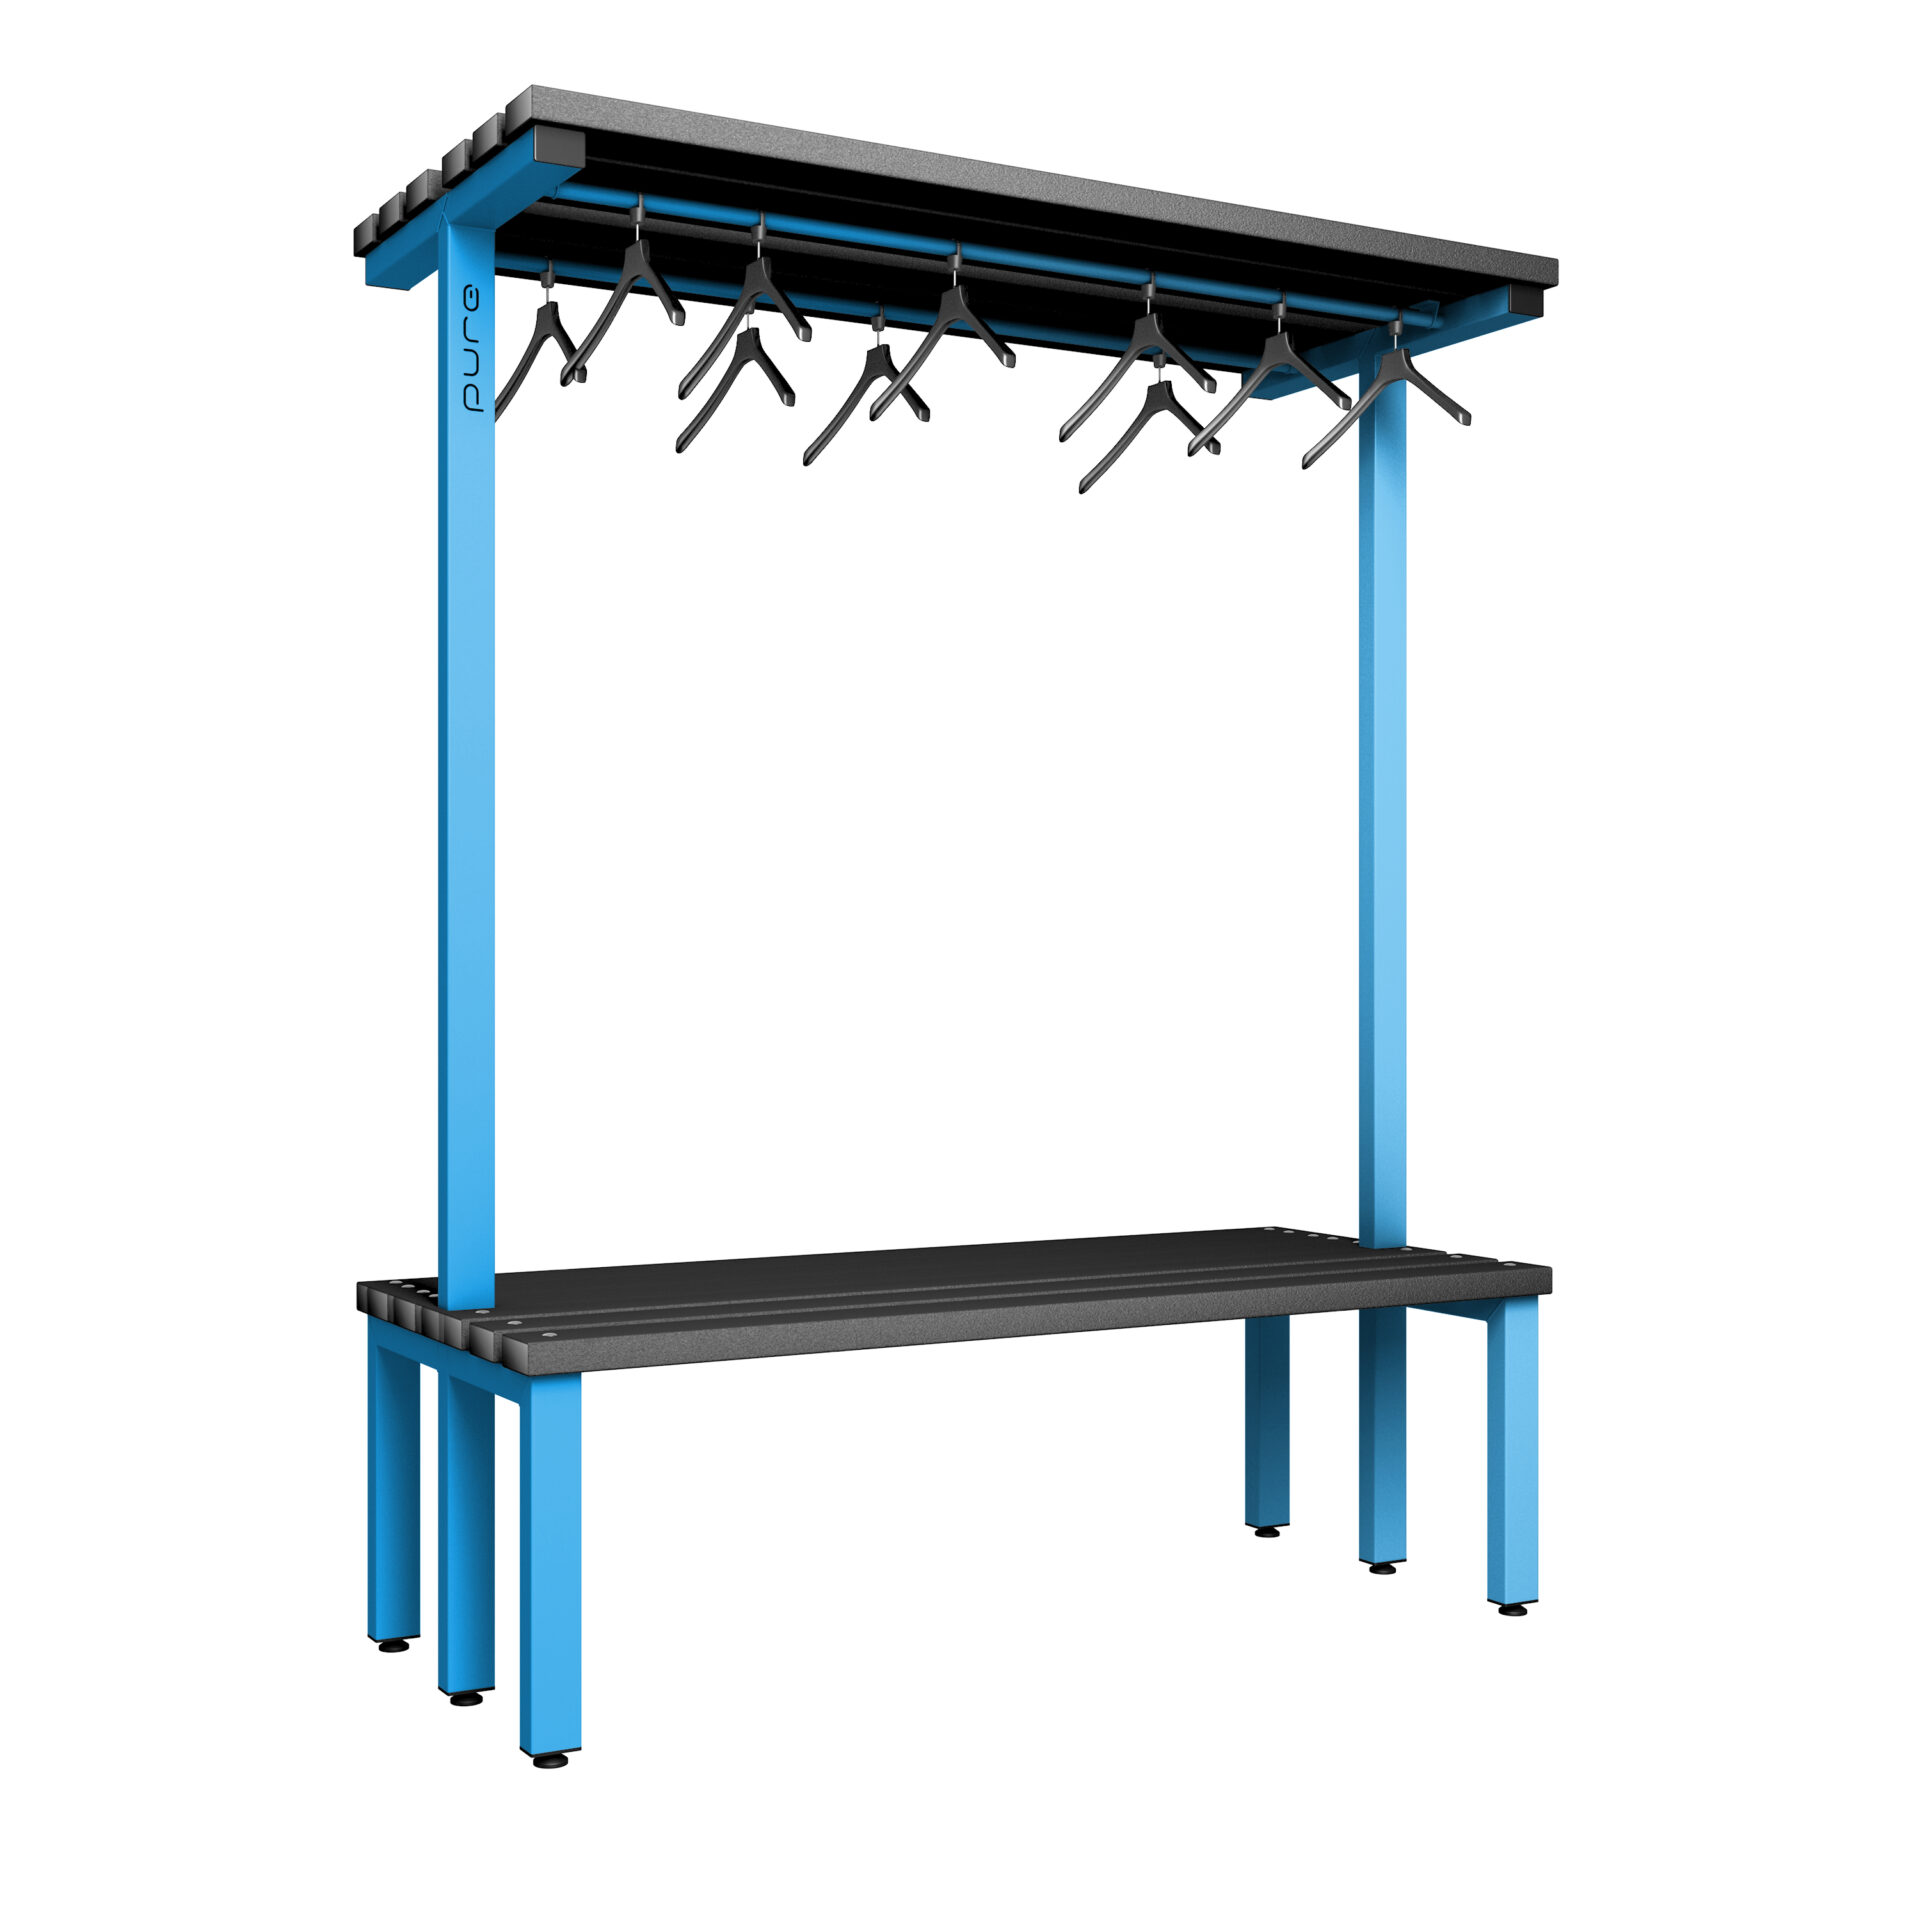 Pure Carbon Zero Double Sided 1500mm Overhead Hanging Bench - Cornflower Blue / Black Polymer